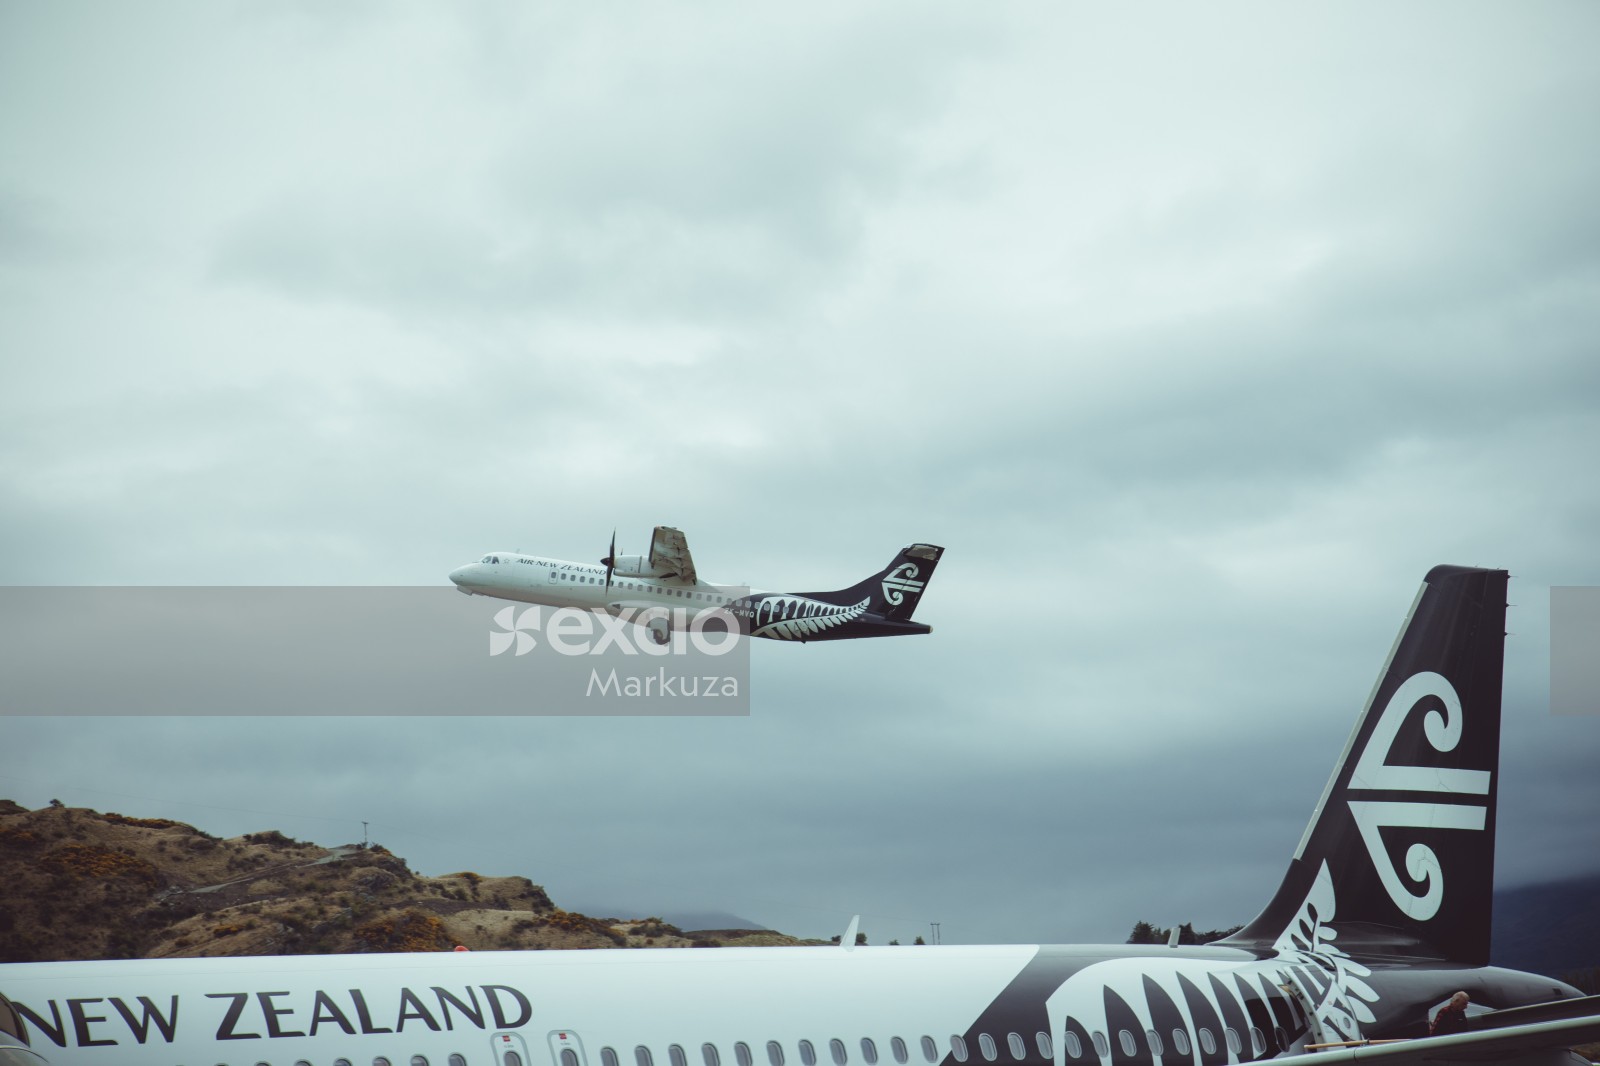 Two AIR New Zealand planes